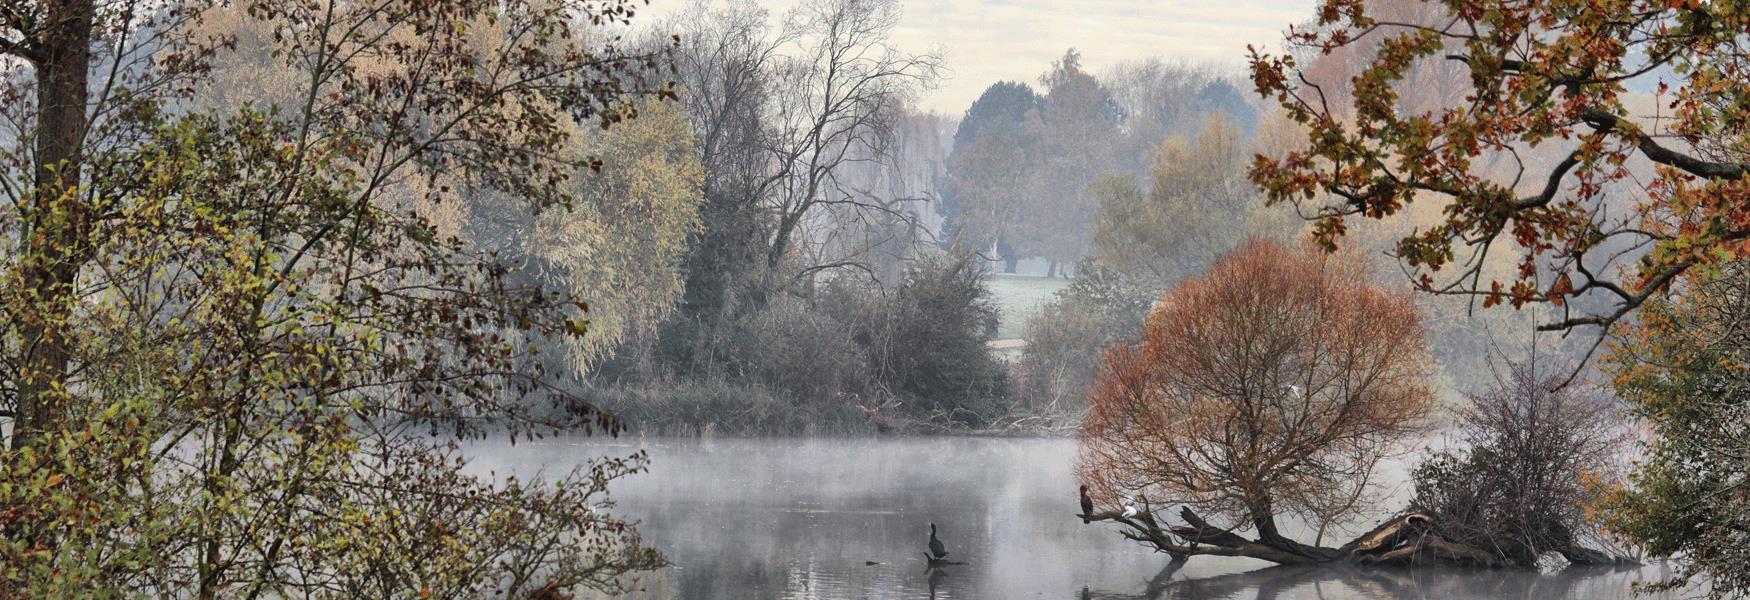 Mote Park brings some amazing photo opportunities in all seasons but winter can add a little more drama in an ever changing but much loved landscape.